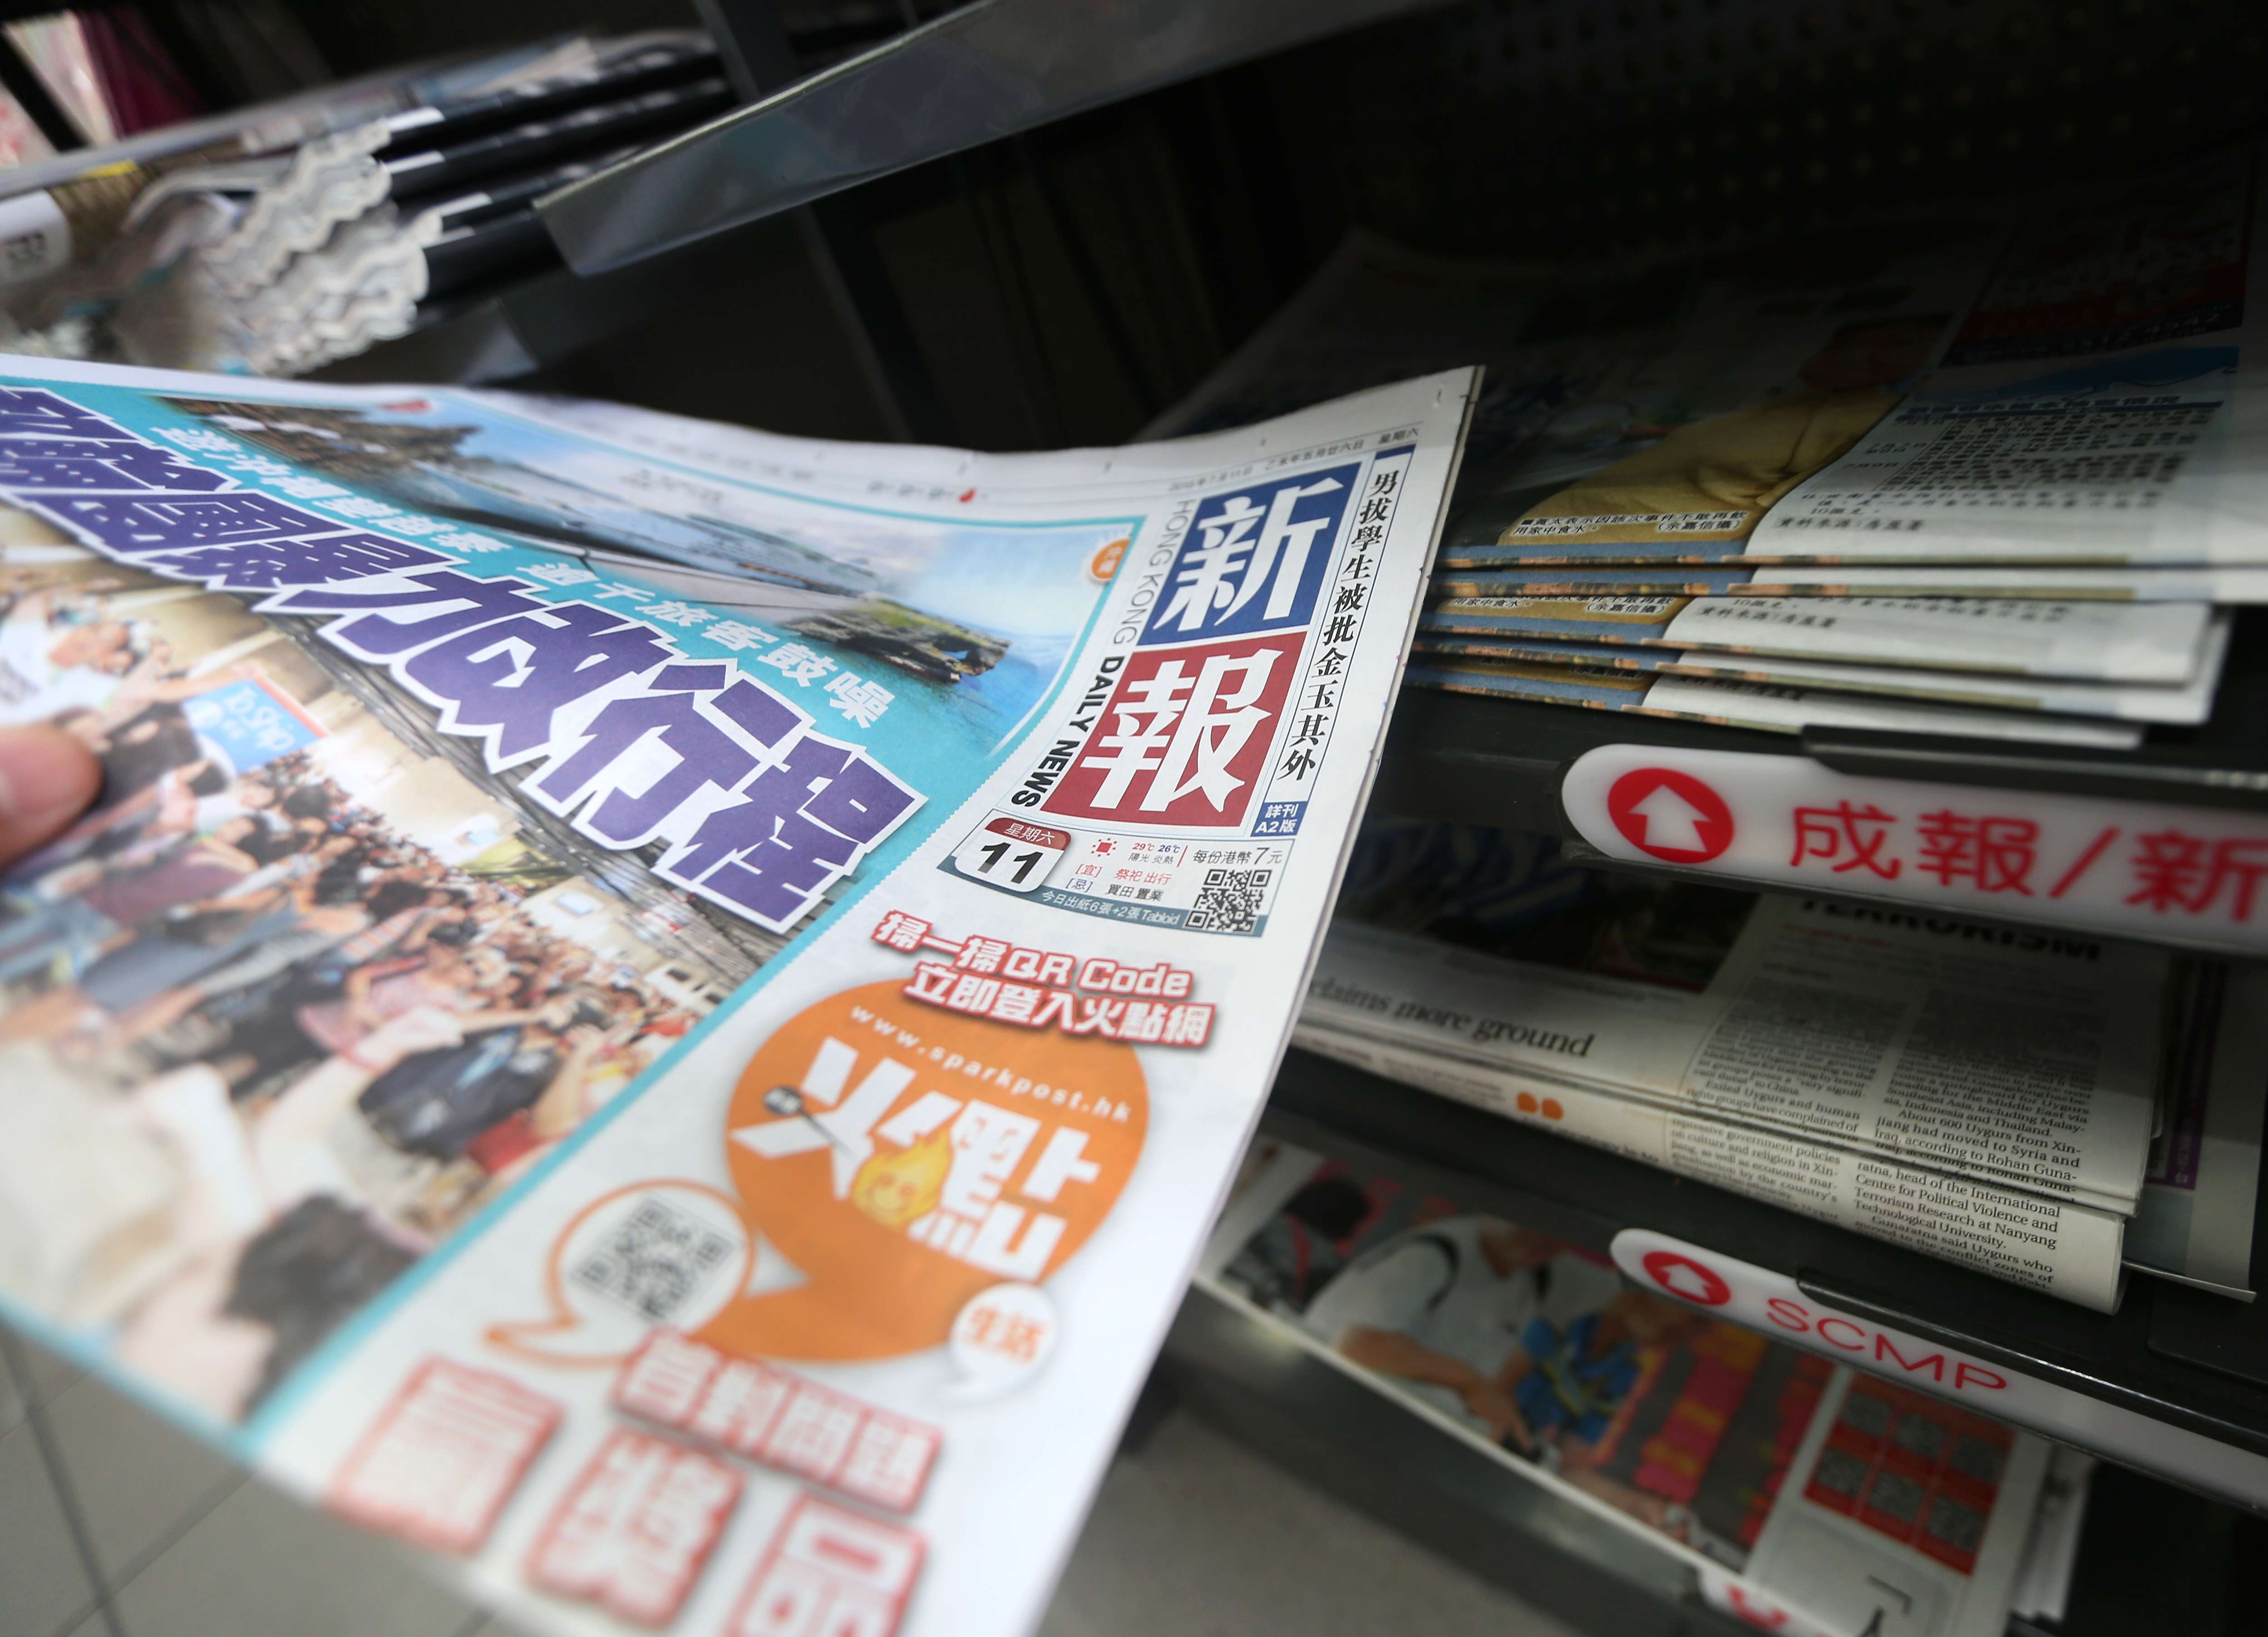 The last edition of the Hong Kong Daily News at a 7-Eleven in Happy Valley on July 11, 2015. The local Chinese-language newspaper ceased publication the following day over “financial deficits” after 56 years in the business, intensifying dire forecasts for print media. Photo: Felix Wong